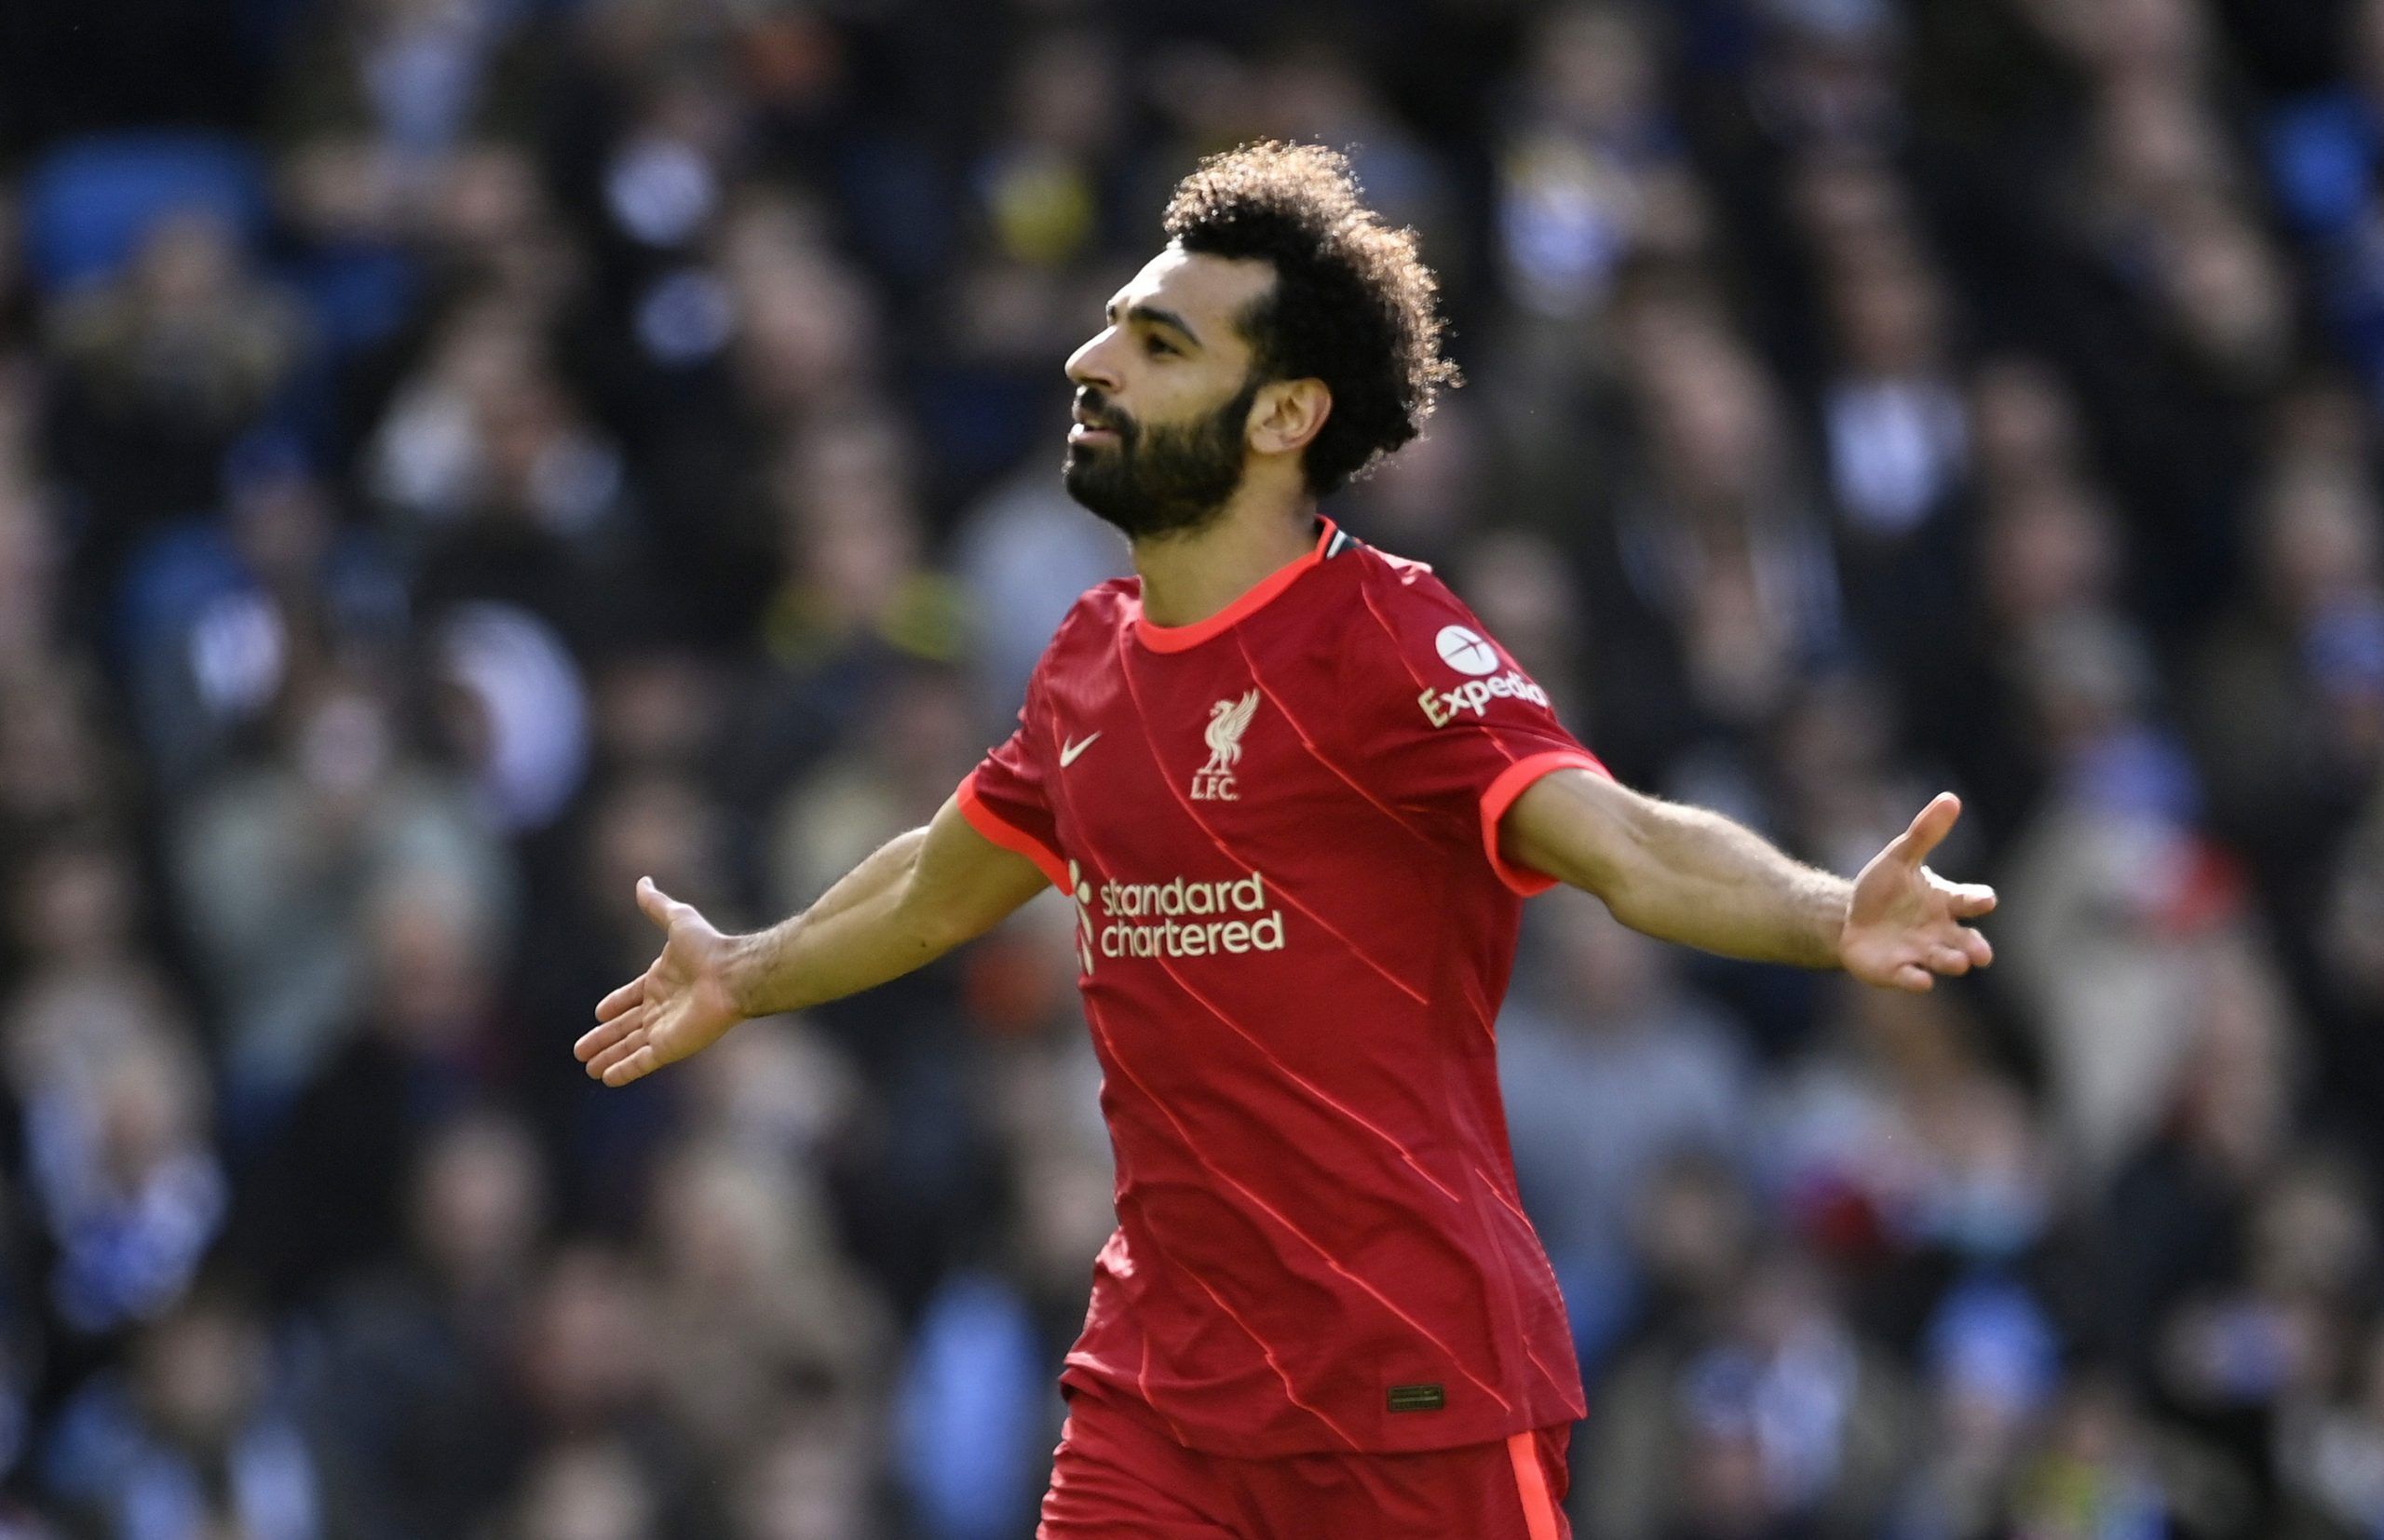 Liverpool: Mohamed Salah could be handed exciting new role -Follow up